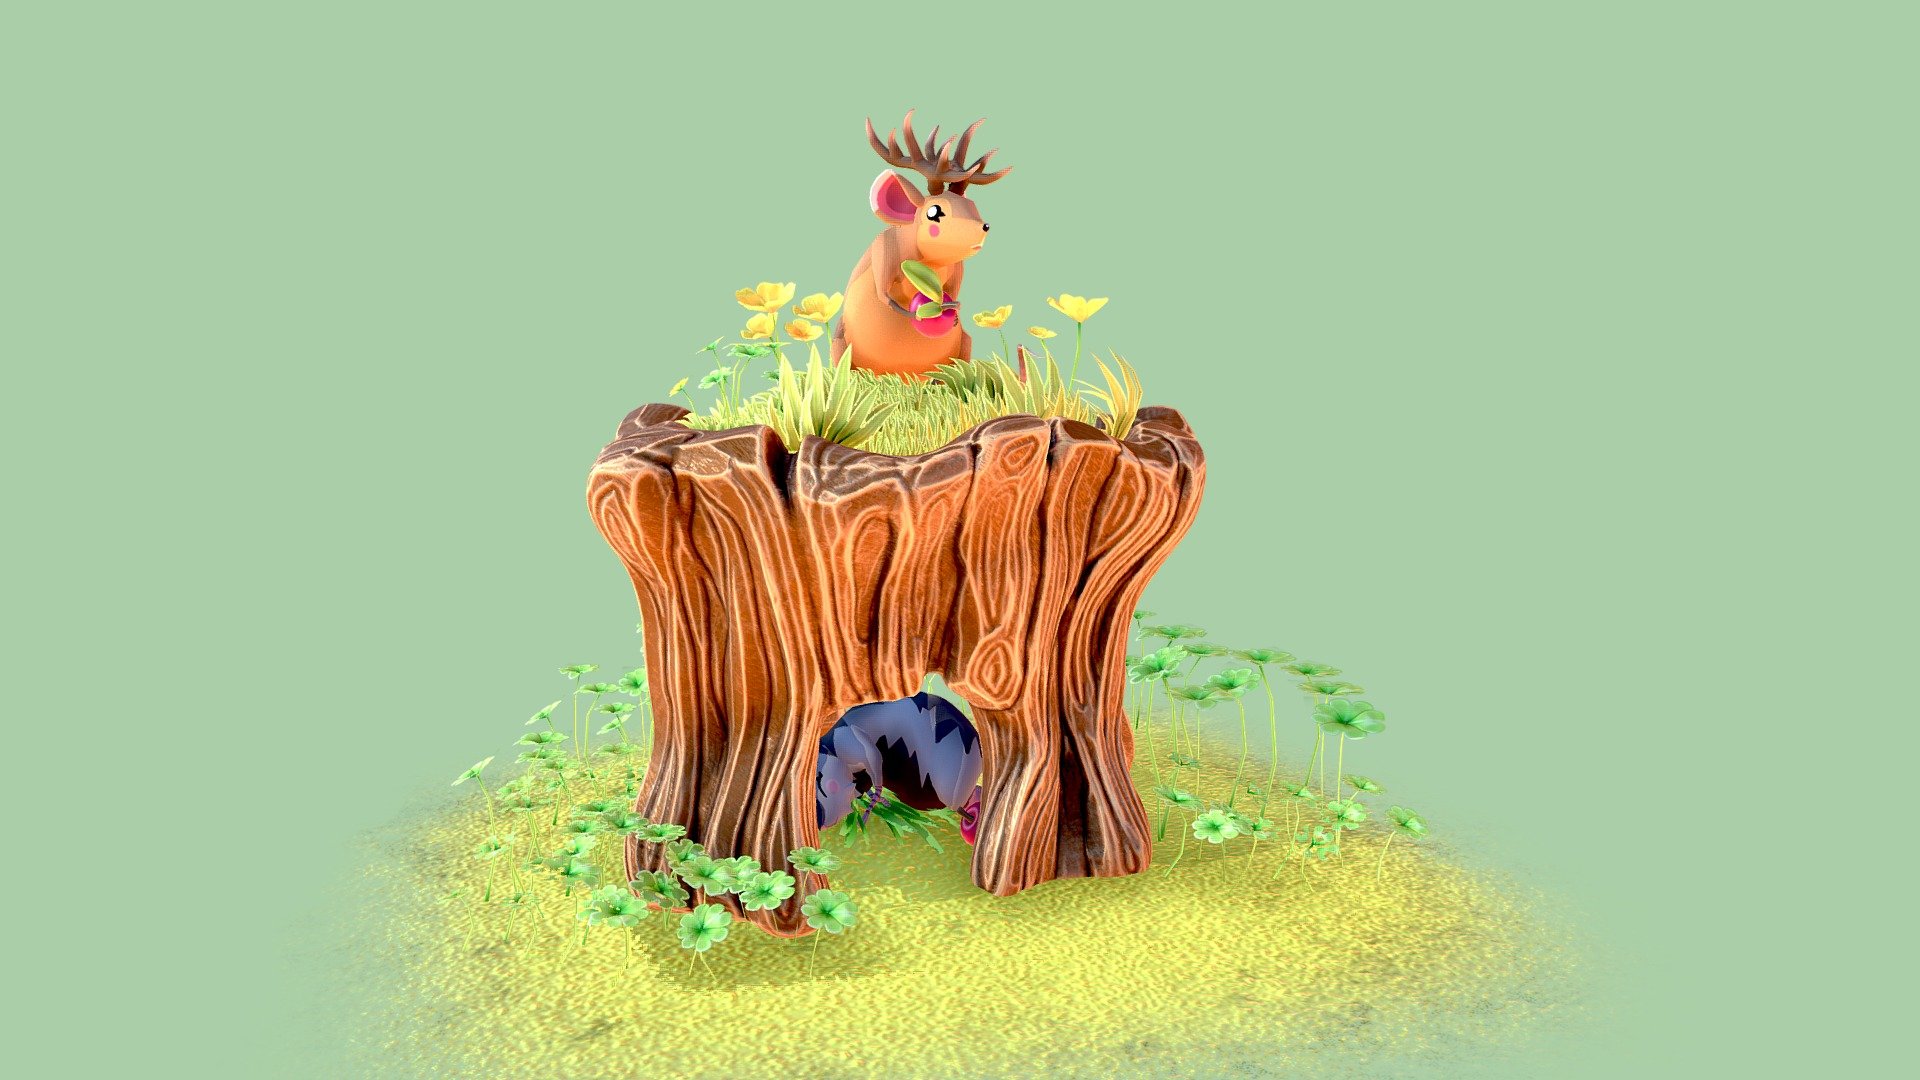 Cute painted style scene with mice and greenery. 
Made to look hand painted and stylized. 
I used normal maps to bake micro detail into the surfaces of the models similar to how animal crossing new horizon has done. 
Modeled in Maya and textured in Substance painter 3d model